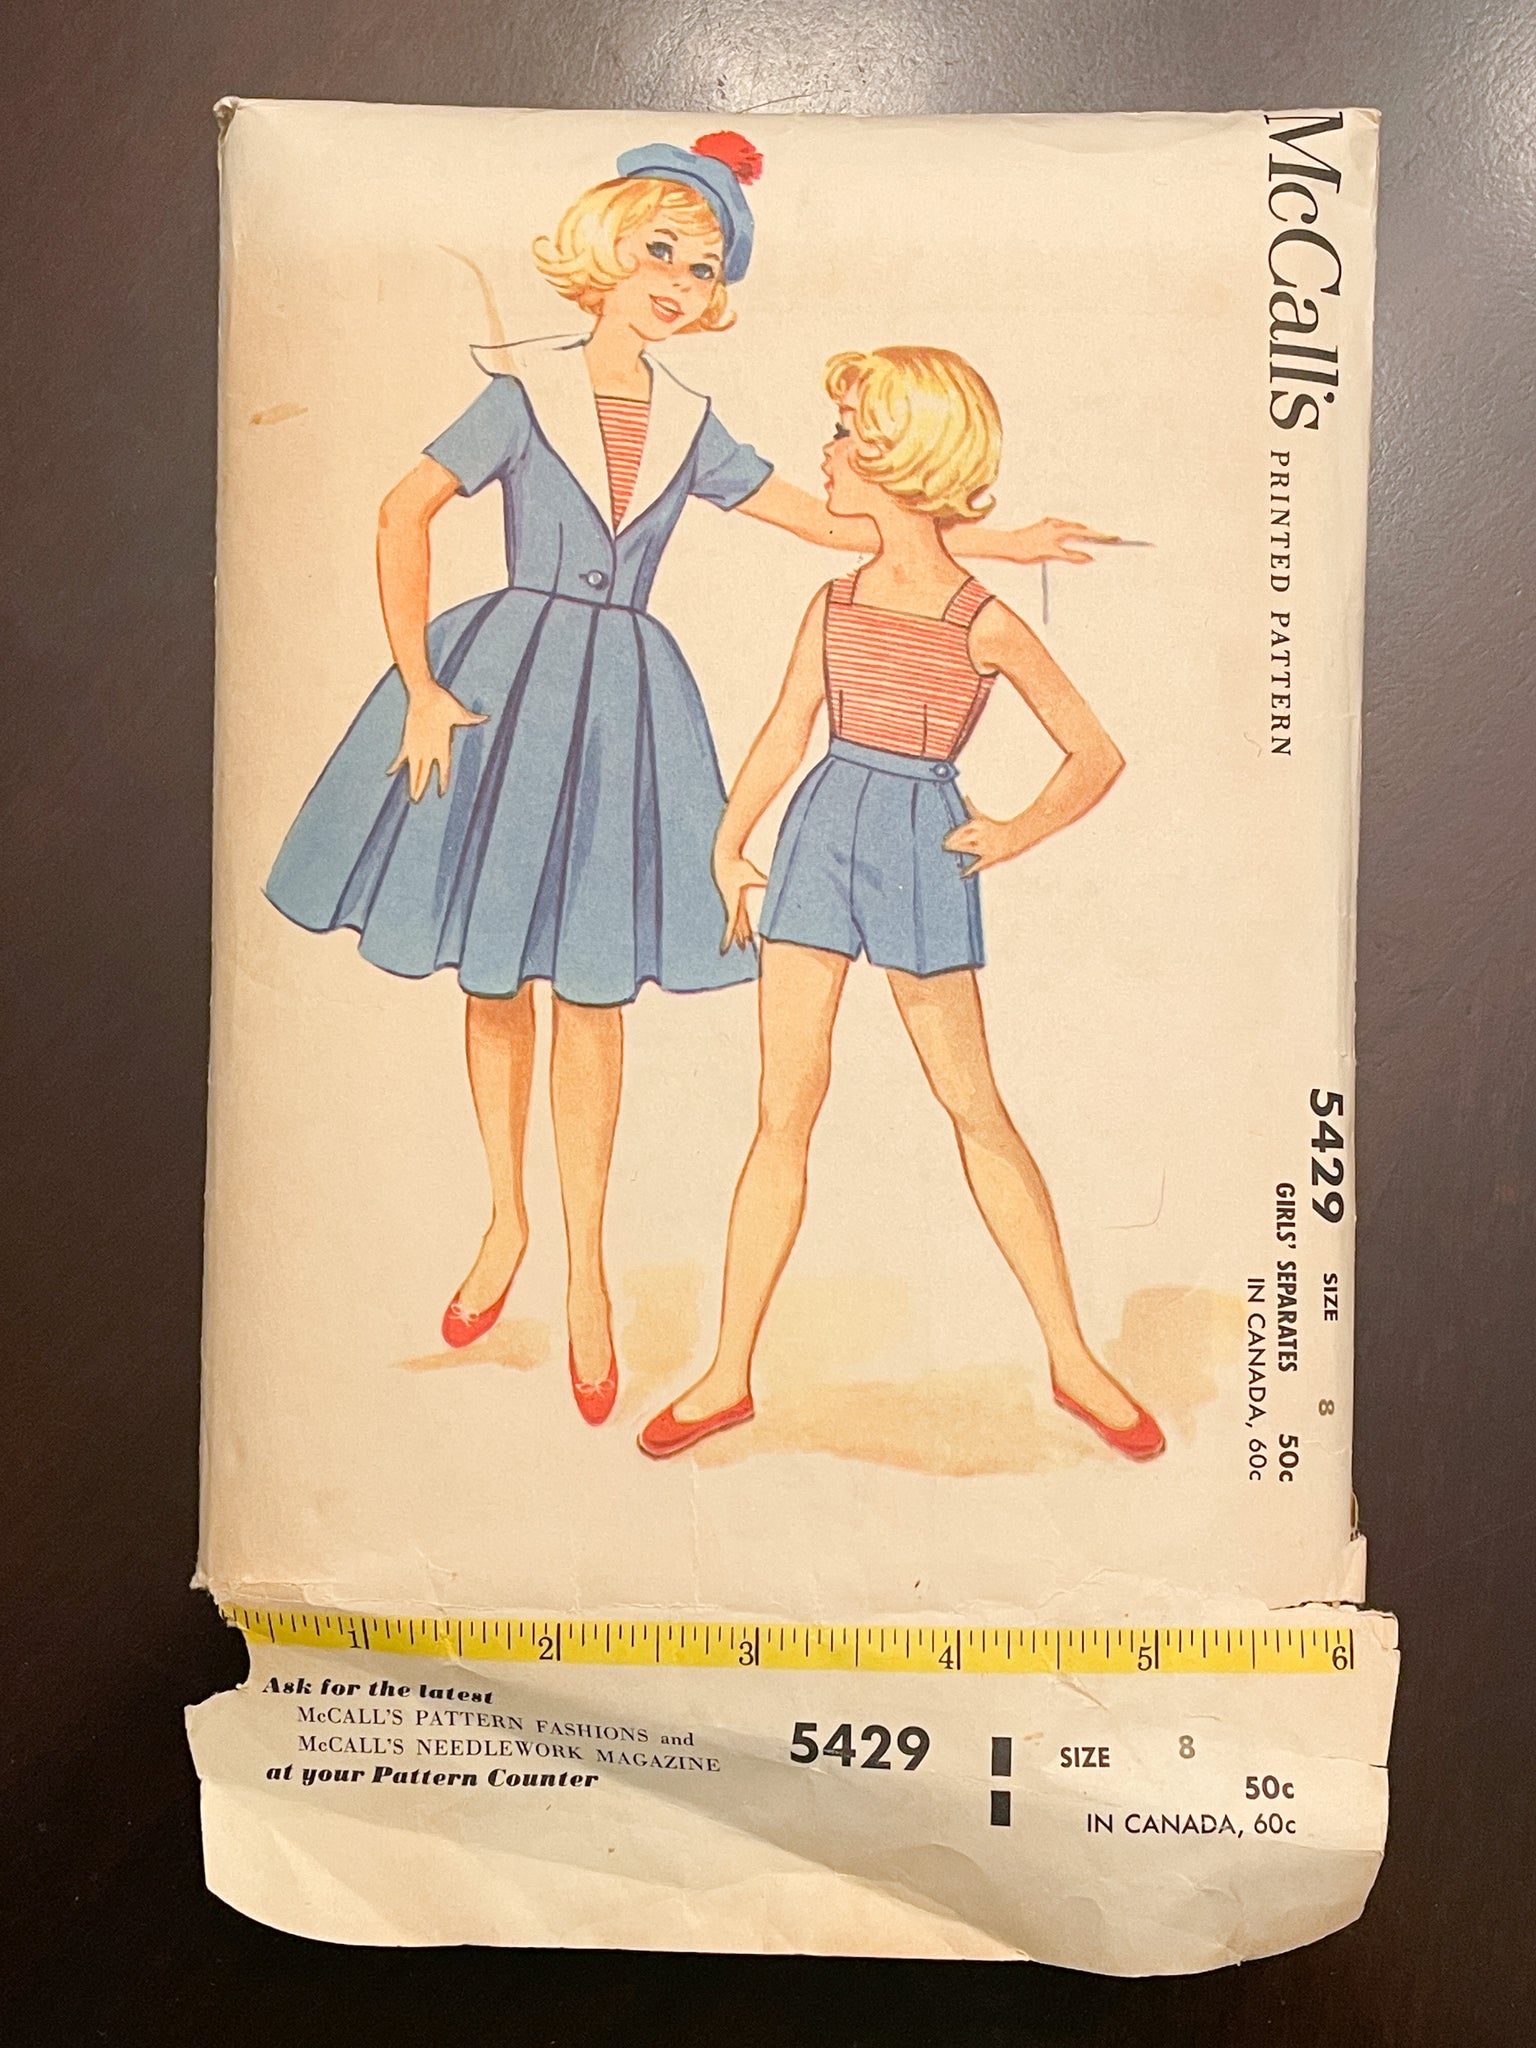 SALE 1960 McCall's 5429 Pattern - Girl's Camisole, Jacket, Shorts and Skirt